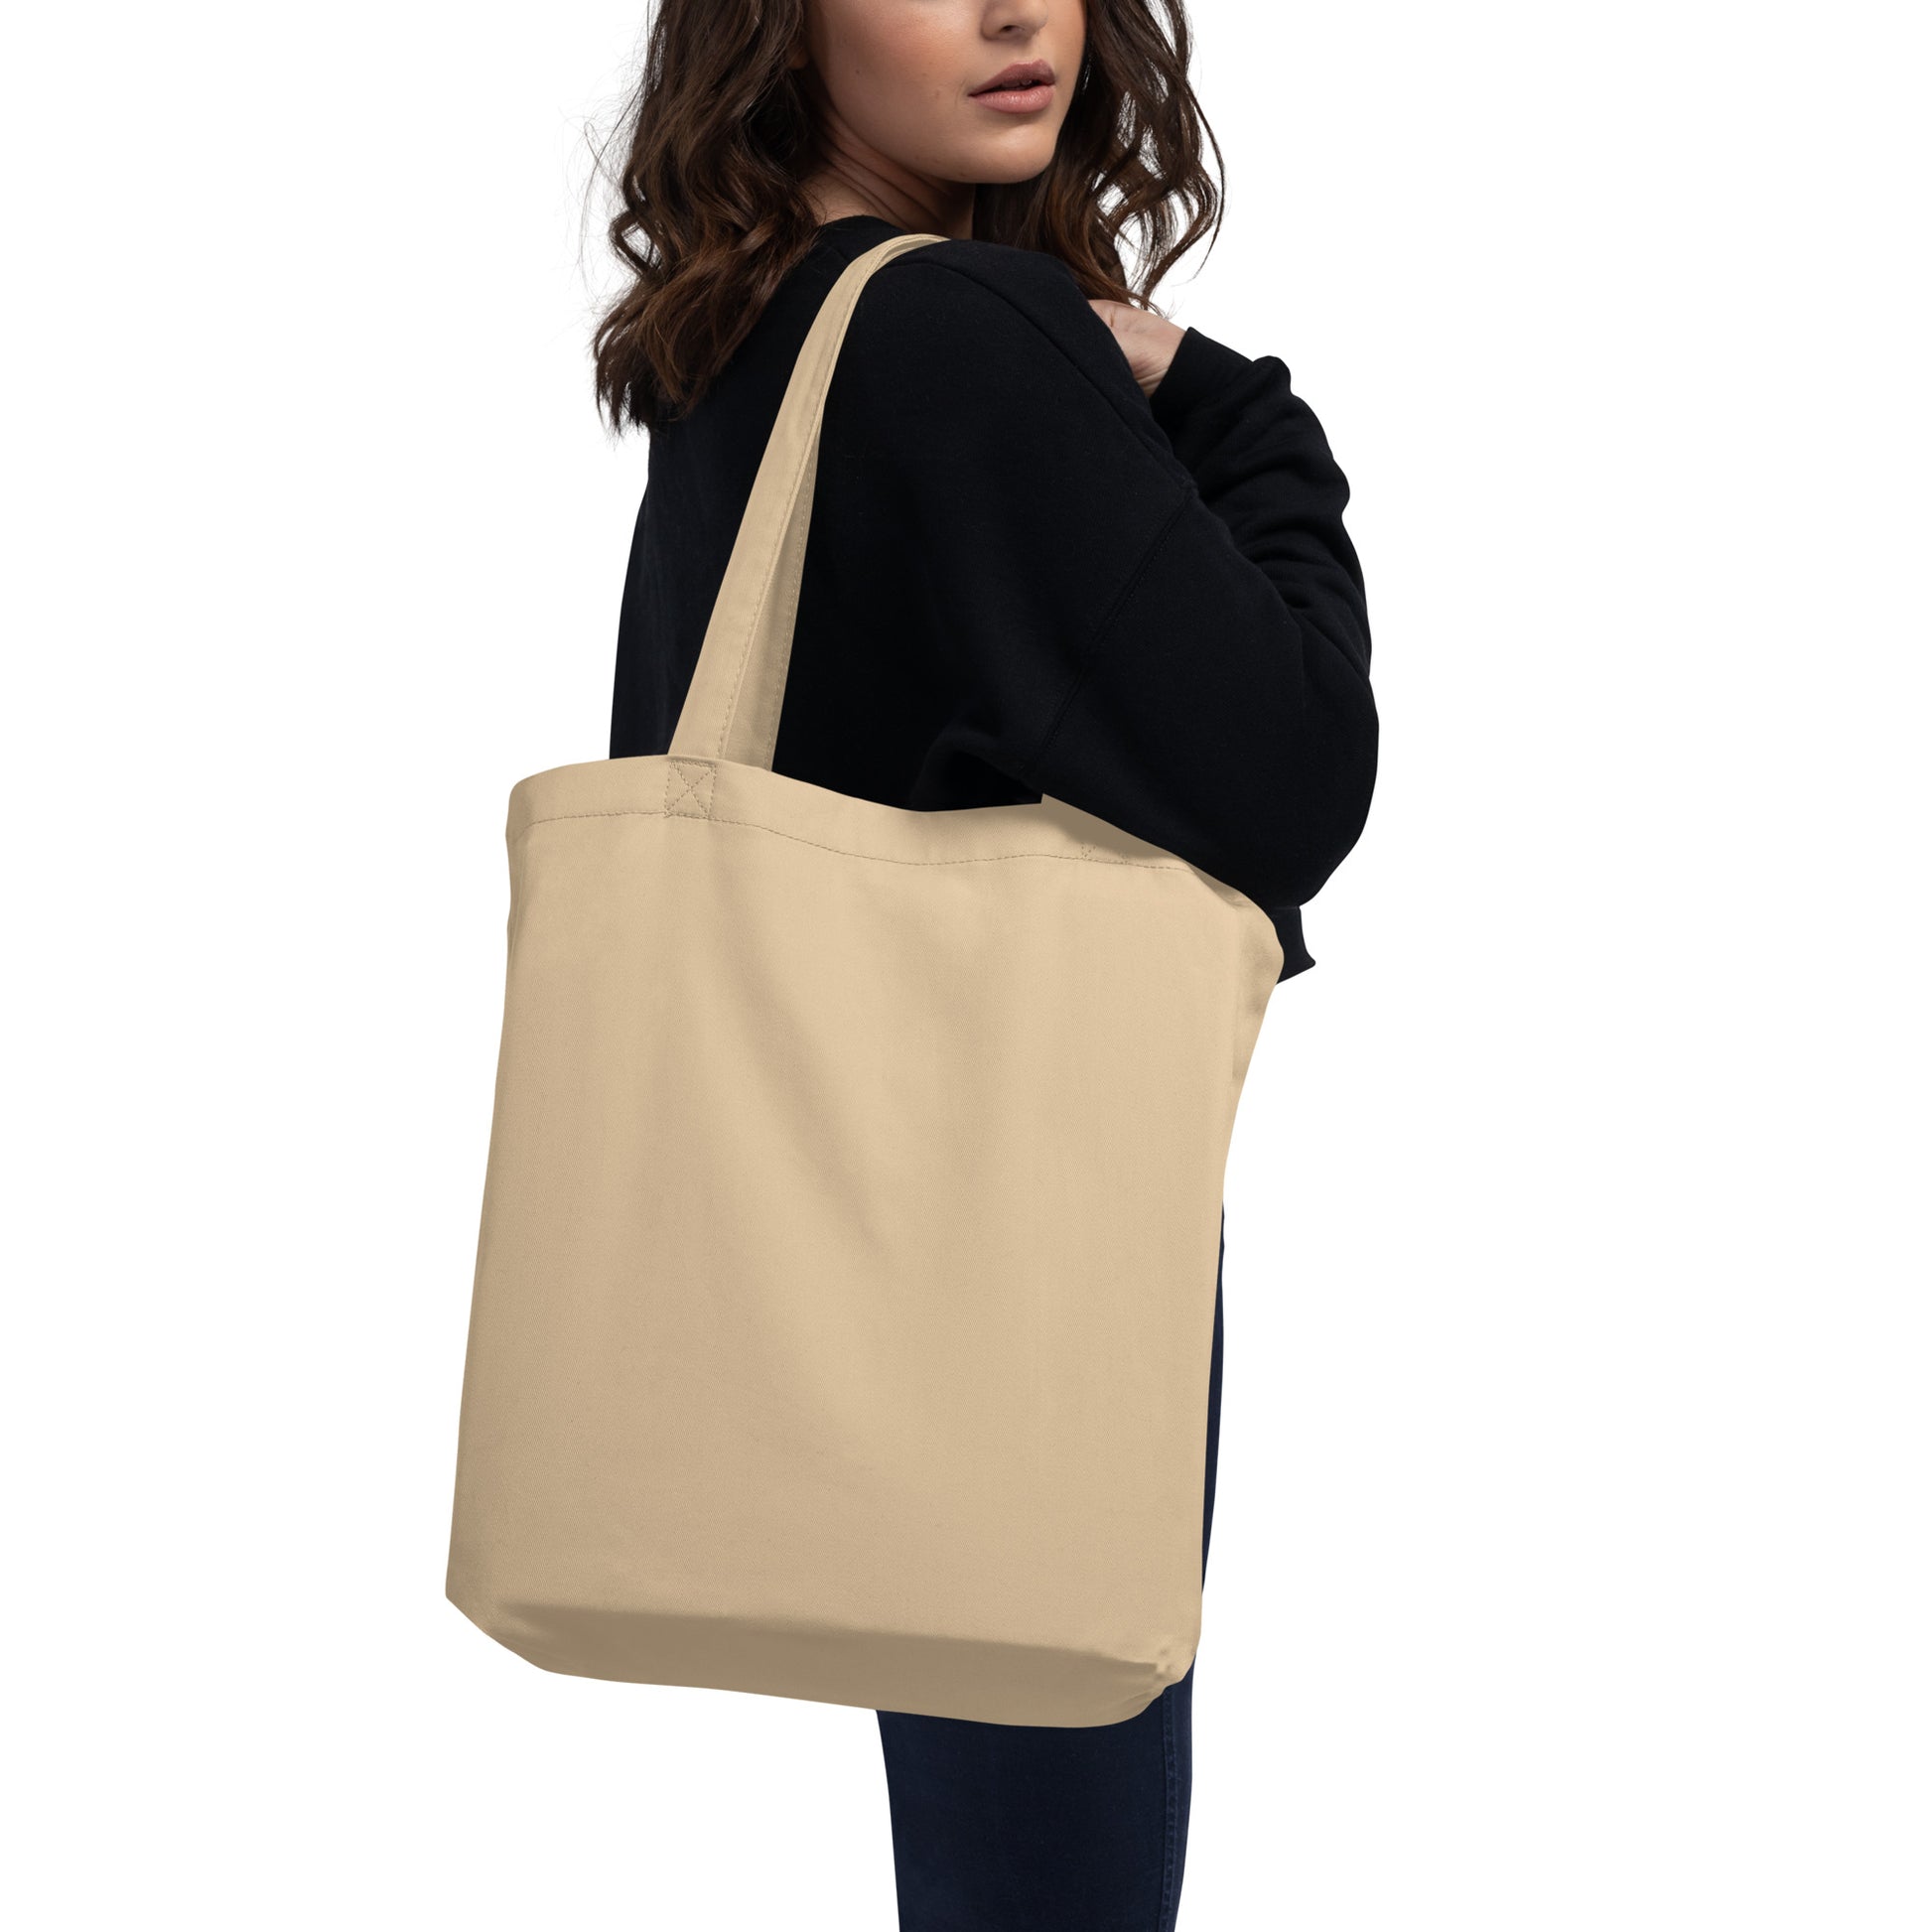 Aviation Gift Organic Tote - Black • CPT Cape Town • YHM Designs - Image 06